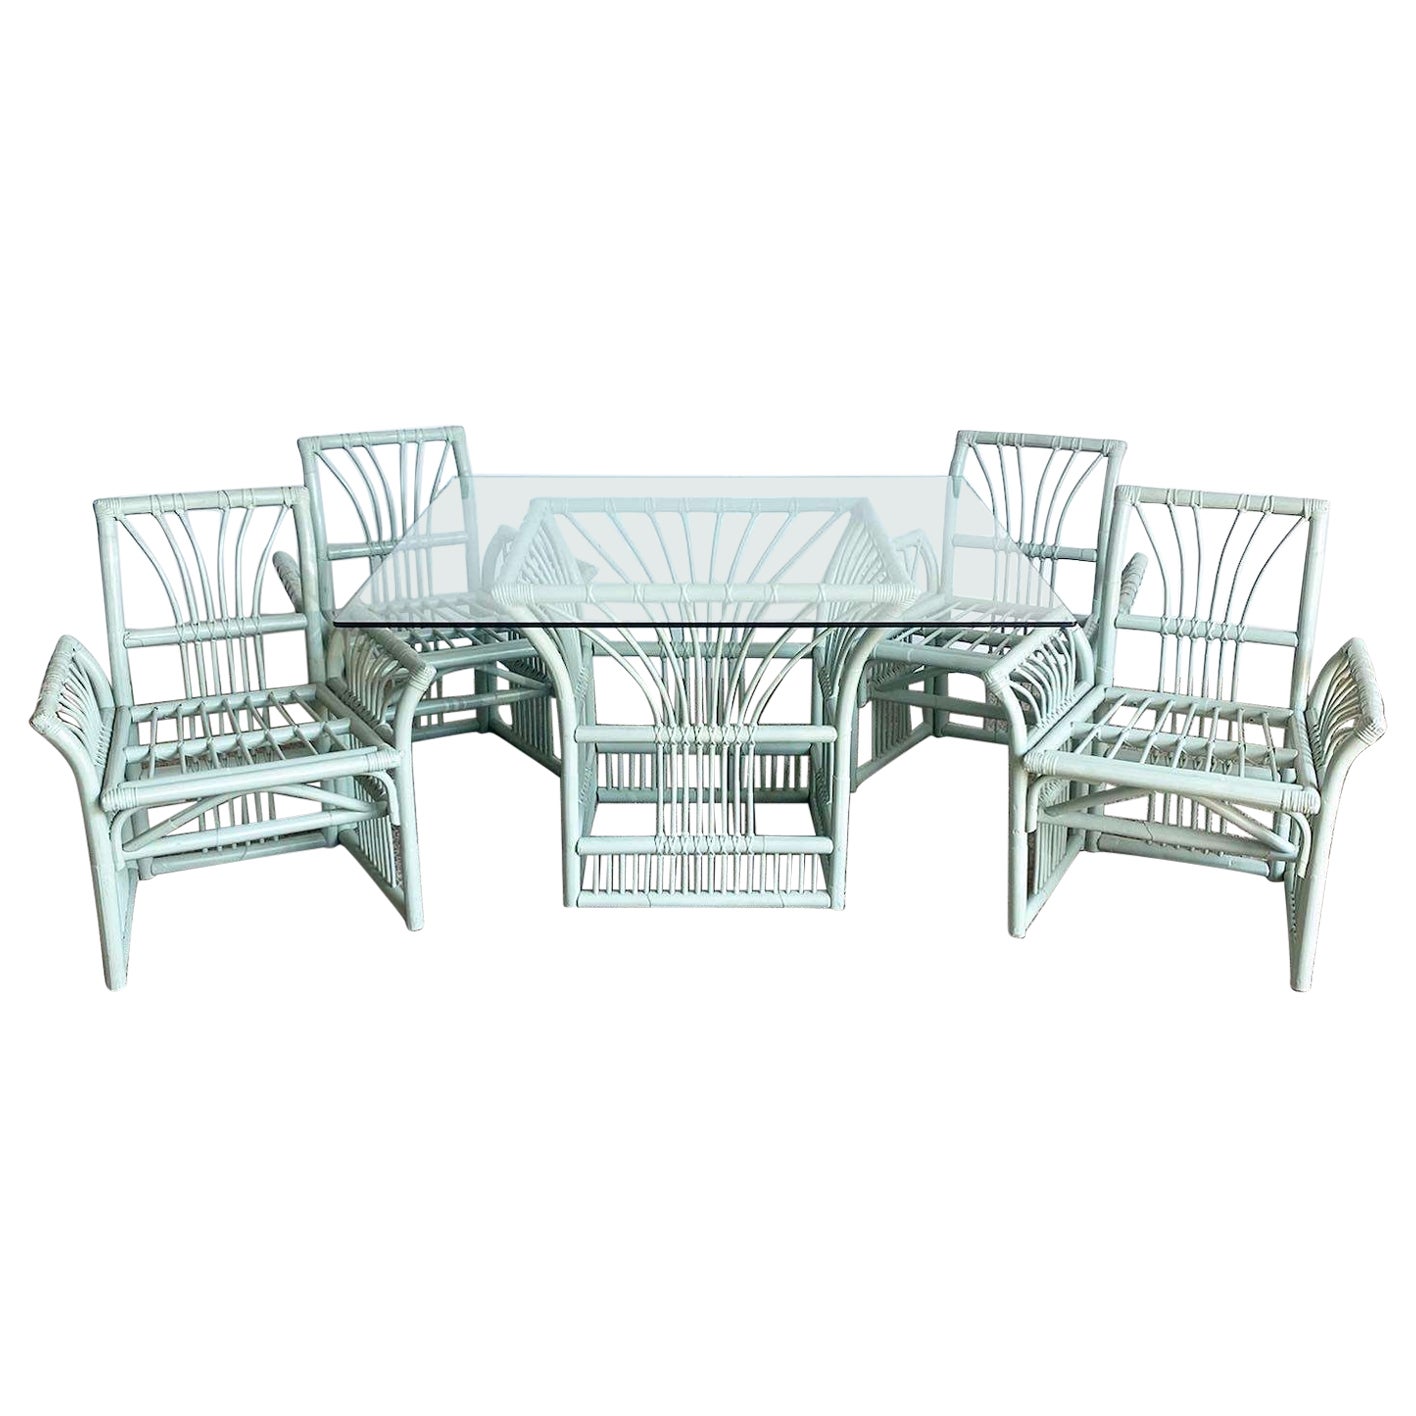 Boho Chic Mint Green Bamboo Rattan Dining Set - 5 Pieces For Sale